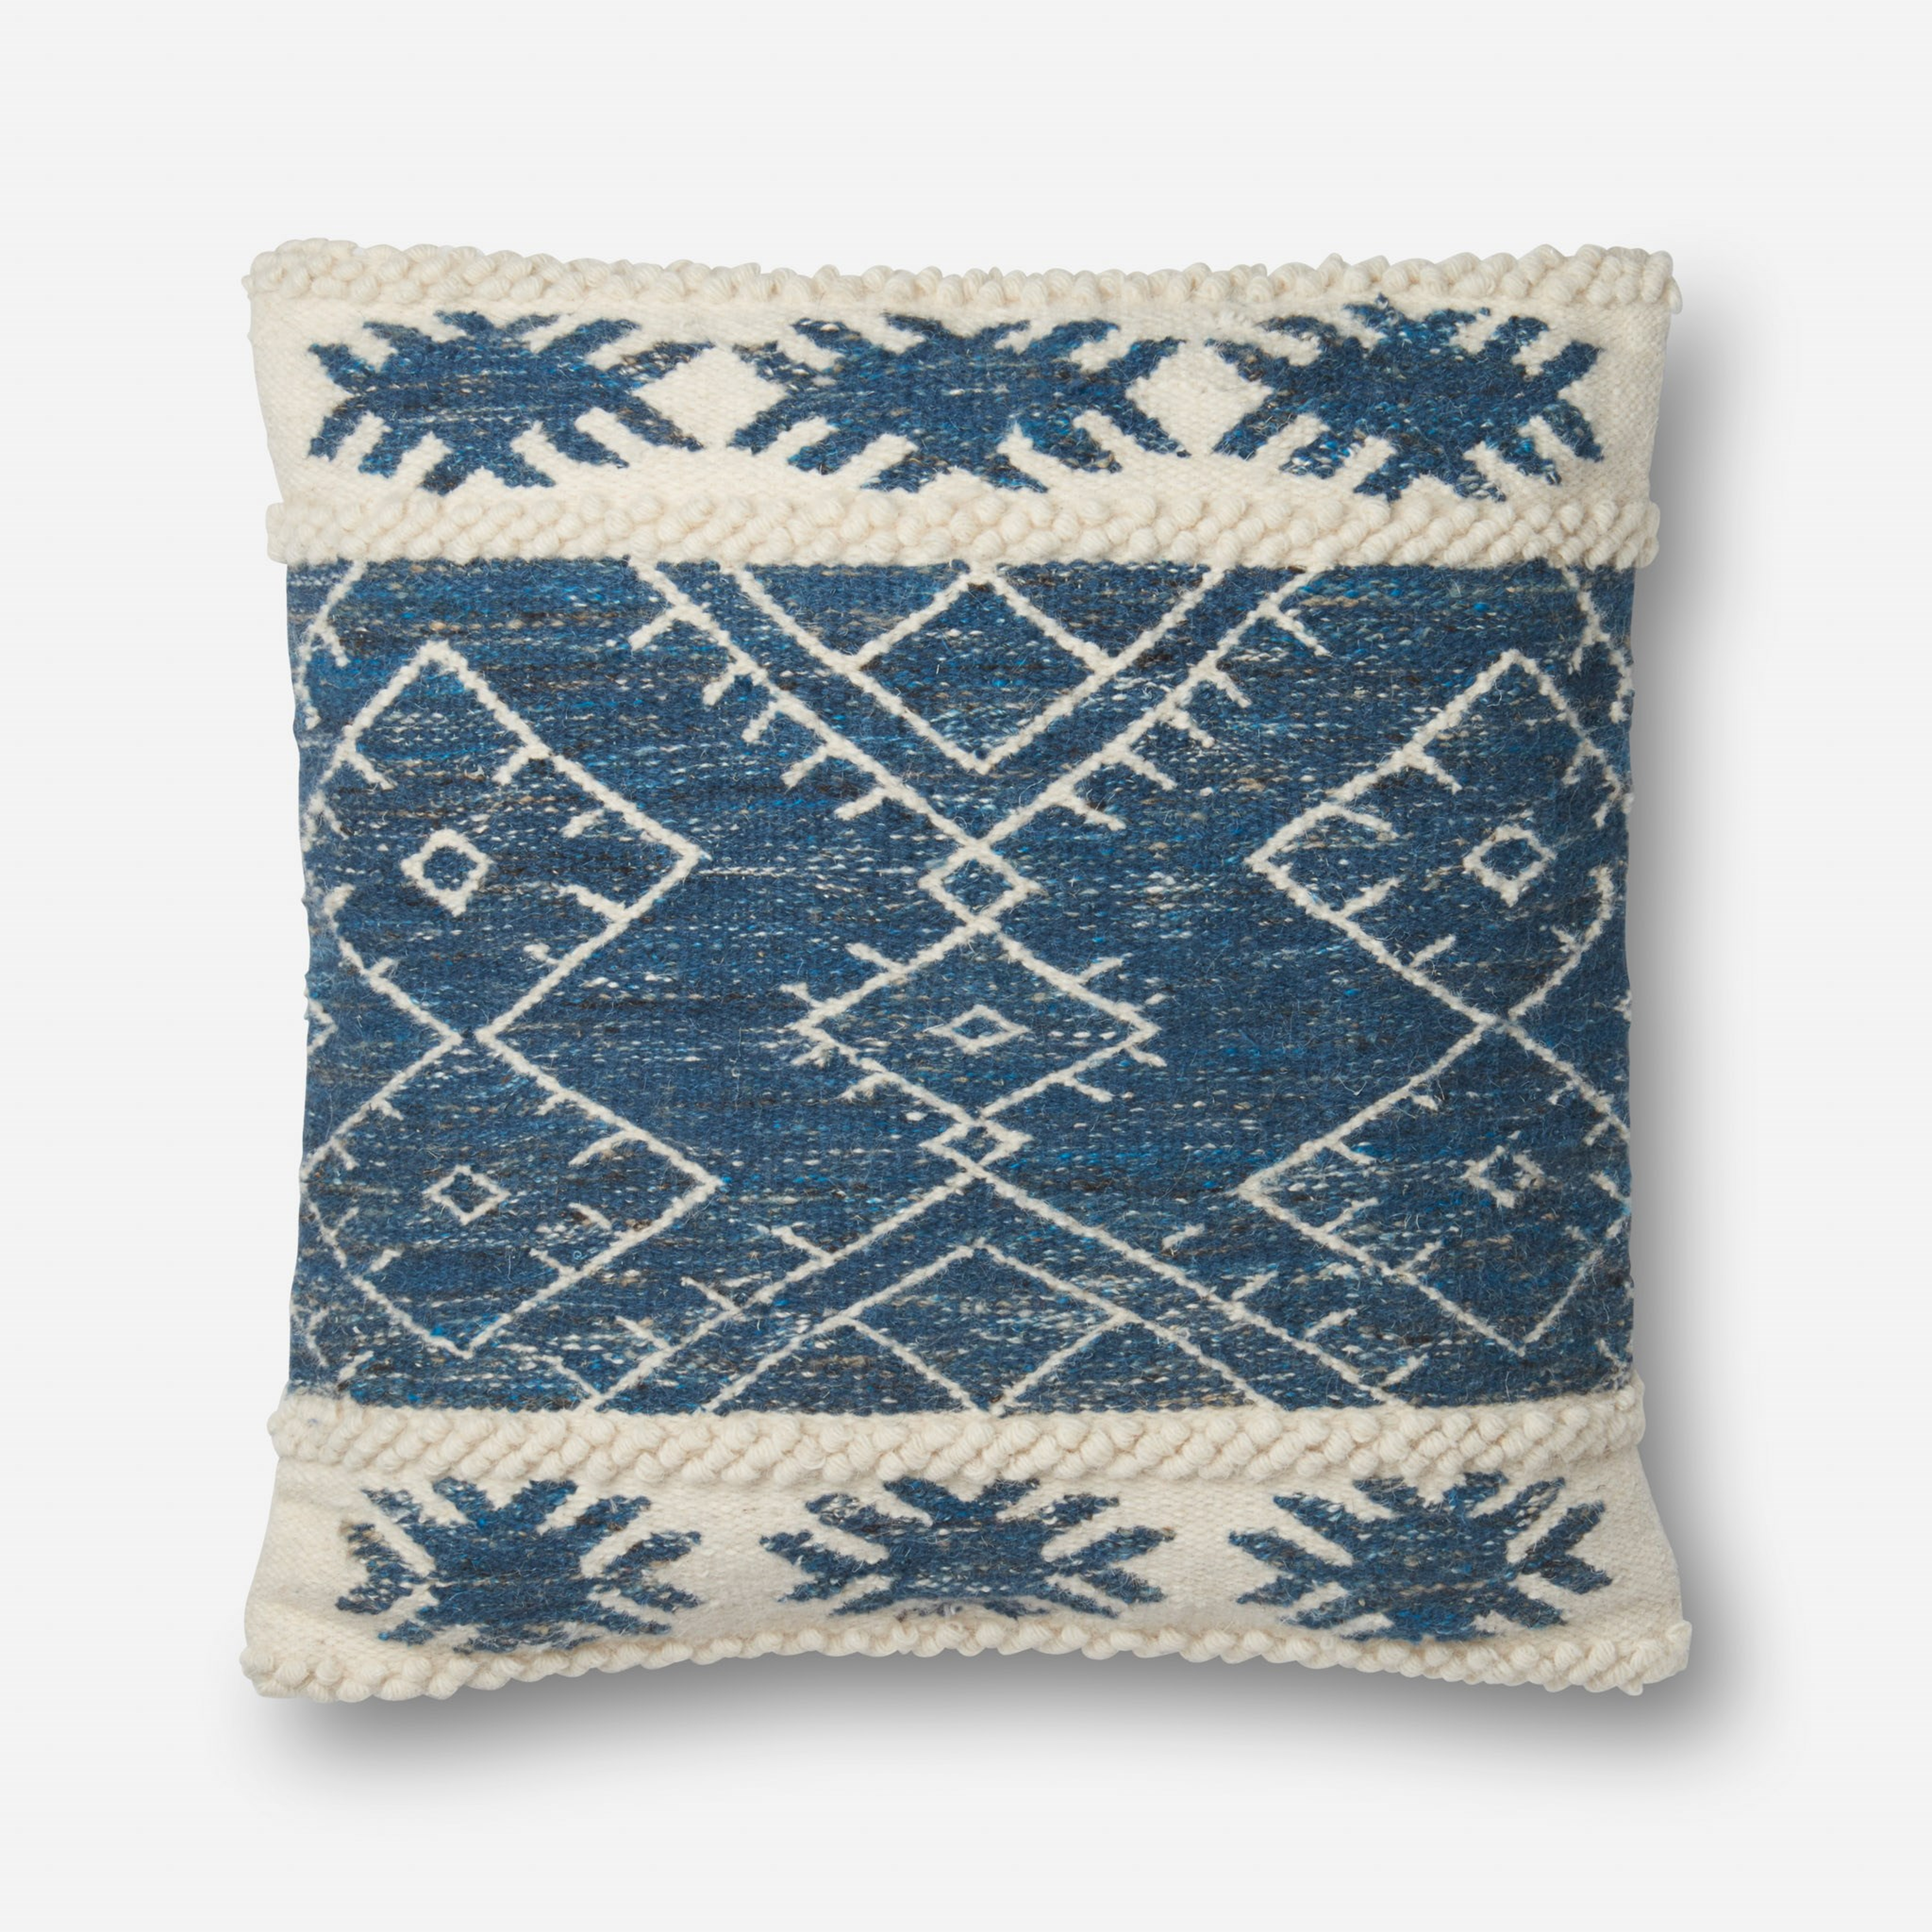 P0619 PILLOWS - BLUE / IVORY - 22" X 22" Cover w/Down - Loloi Rugs